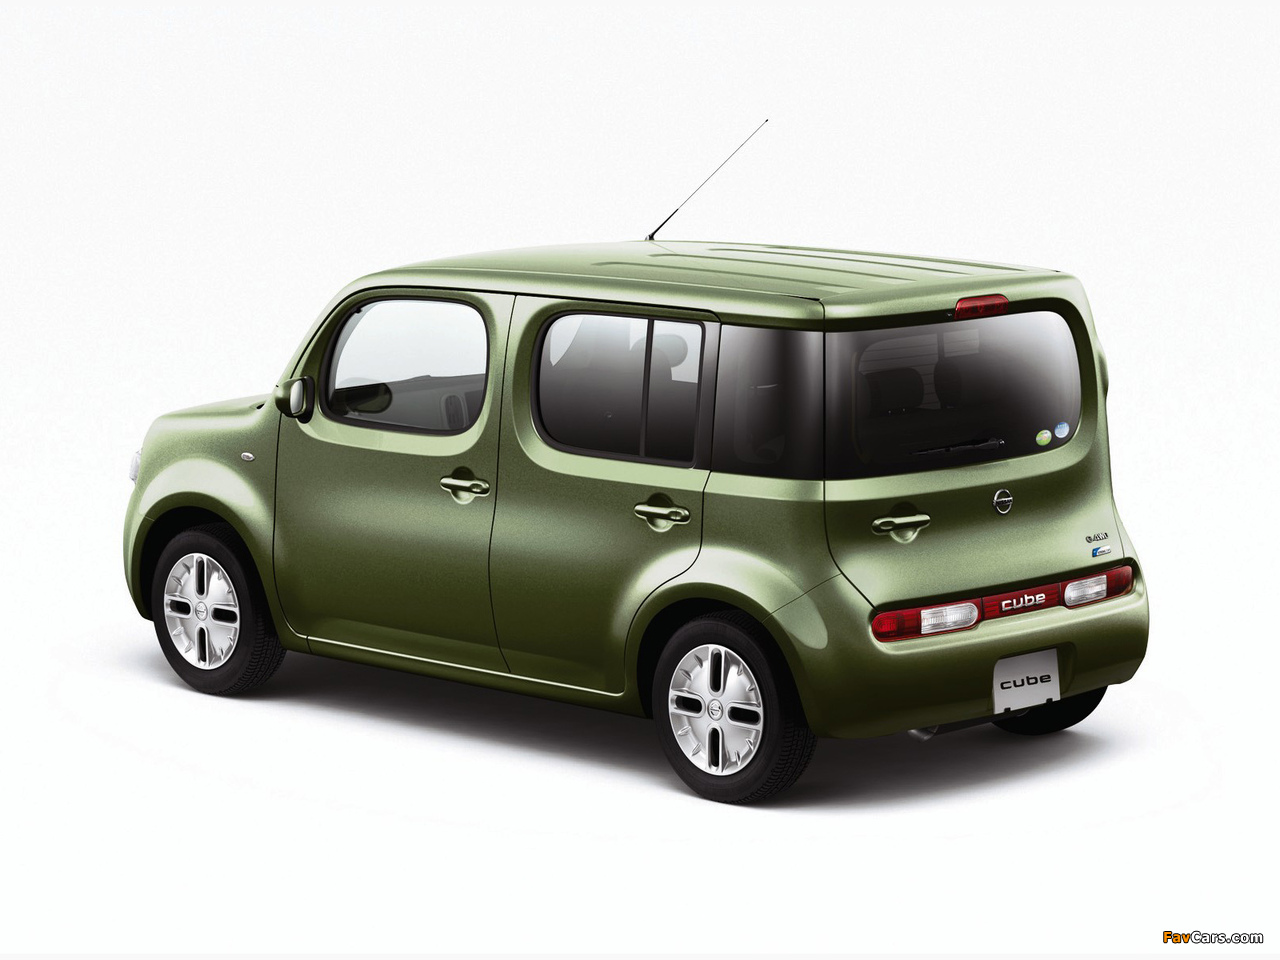 Nissan Cube (Z12) 2008 pictures (1280 x 960)